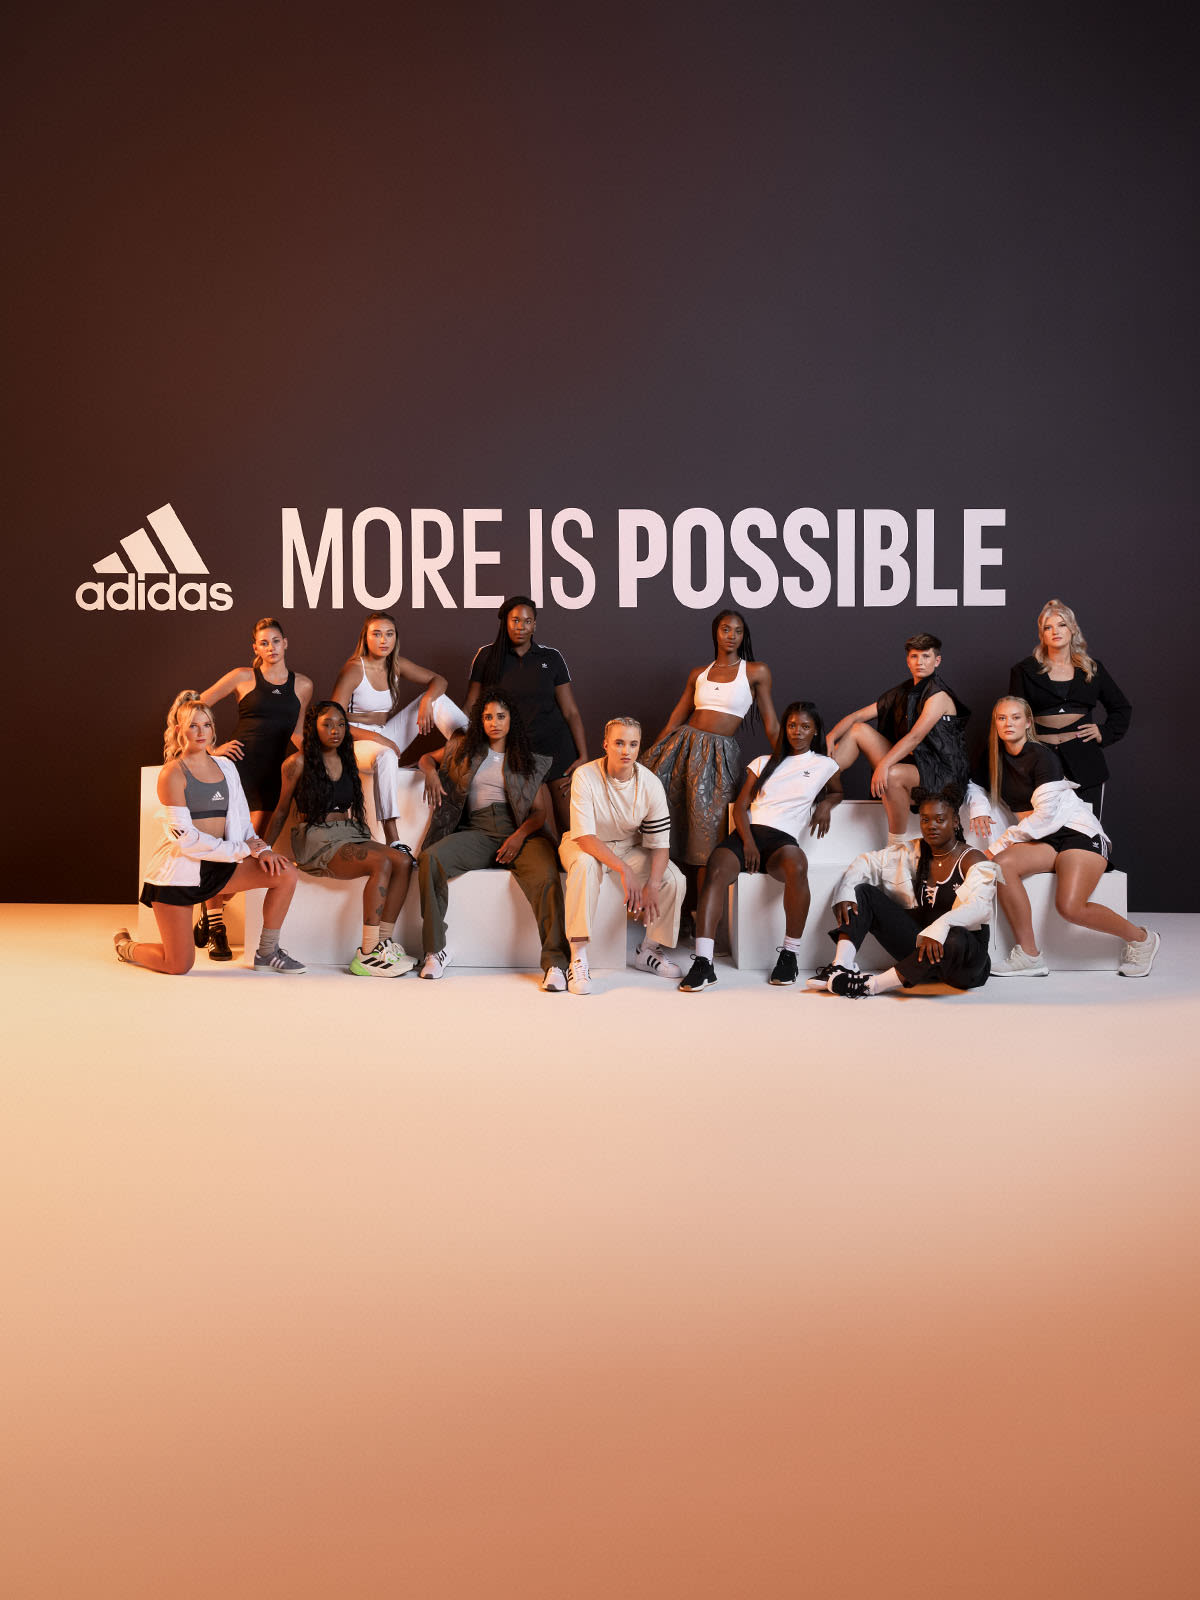 Manifesteren boog Graf 15 Female Student-Athletes Sign Nil Agreements With adidas